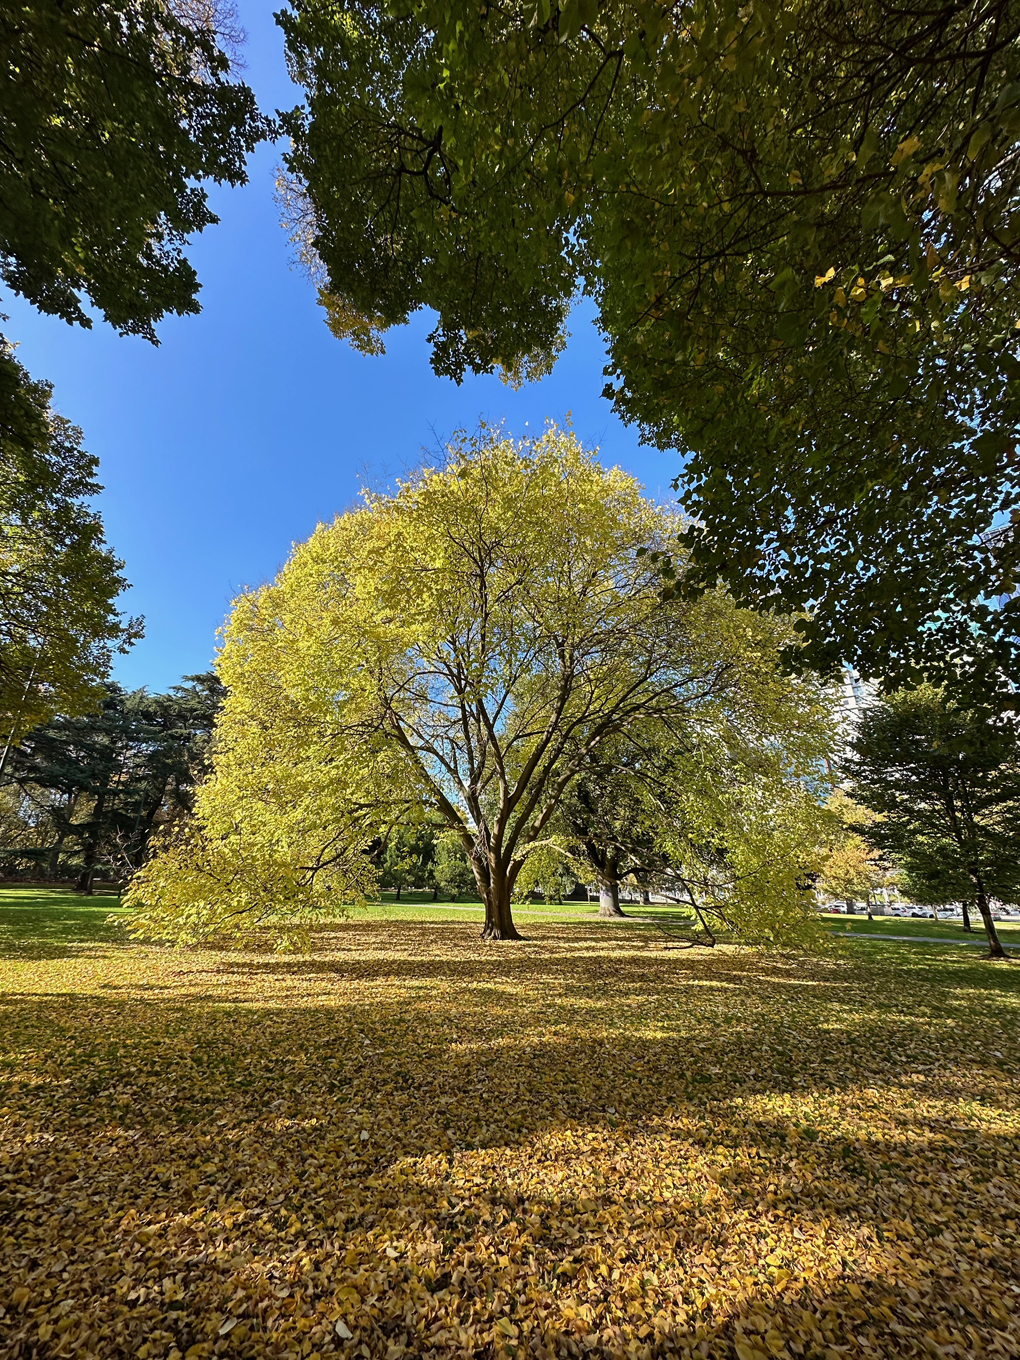 A tree and autumn colours in Carlton Gardens, Melbourne. Golden/yellow fallen leaves.